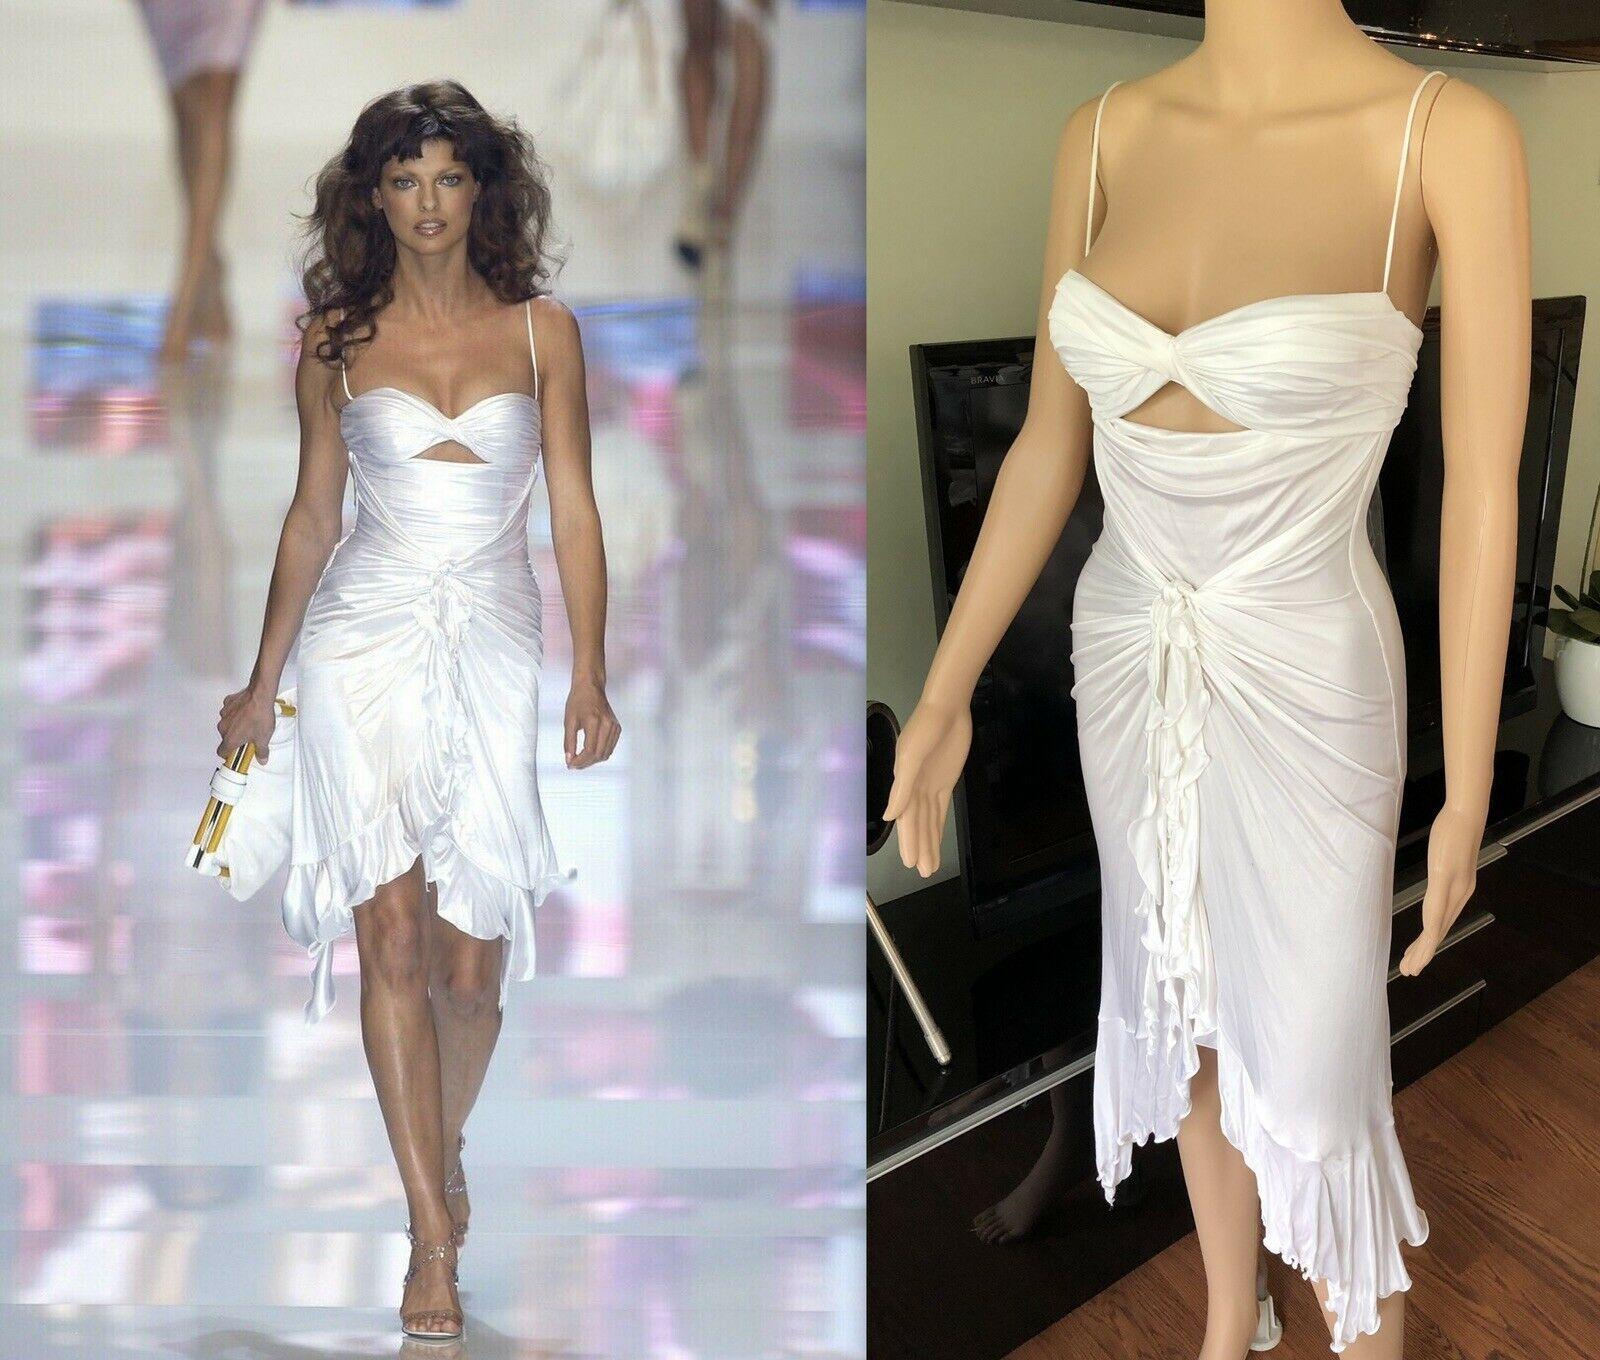 NWT VERSACE S/S 2004 RUNWAY Sexy Plunging Neckline Cutout Dress

Versace sleeveless dress featuring ruffled trim, cutout at bodice, draping throughout and concealed zip closure at back.

Please note this dress is new with tags and Includes clothing